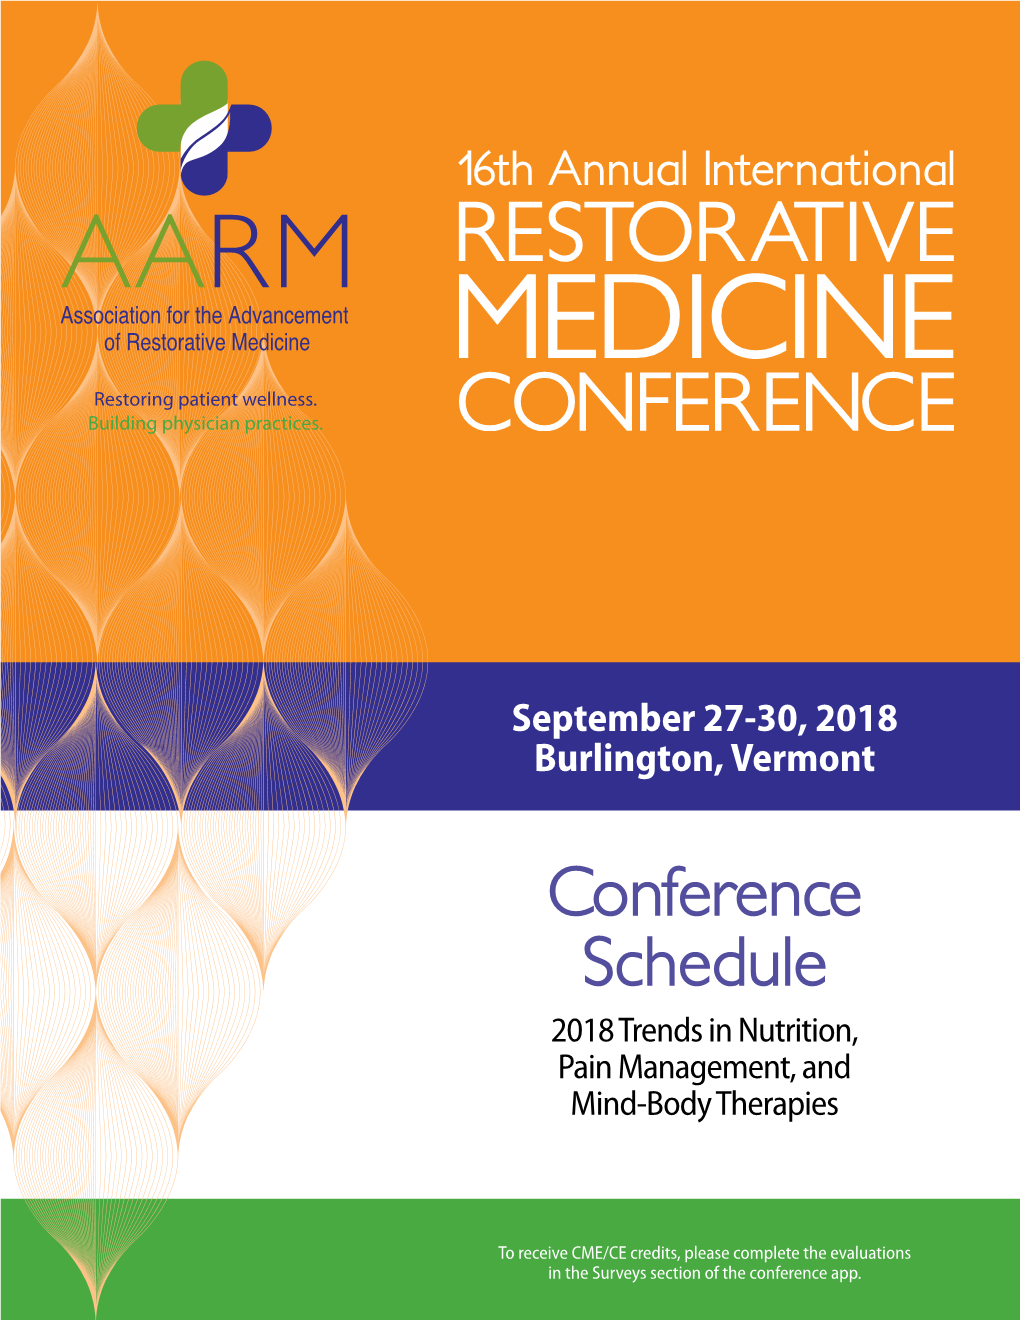 Conference Schedule 2018 Trends in Nutrition, Pain Management, and Mind-Body Therapies